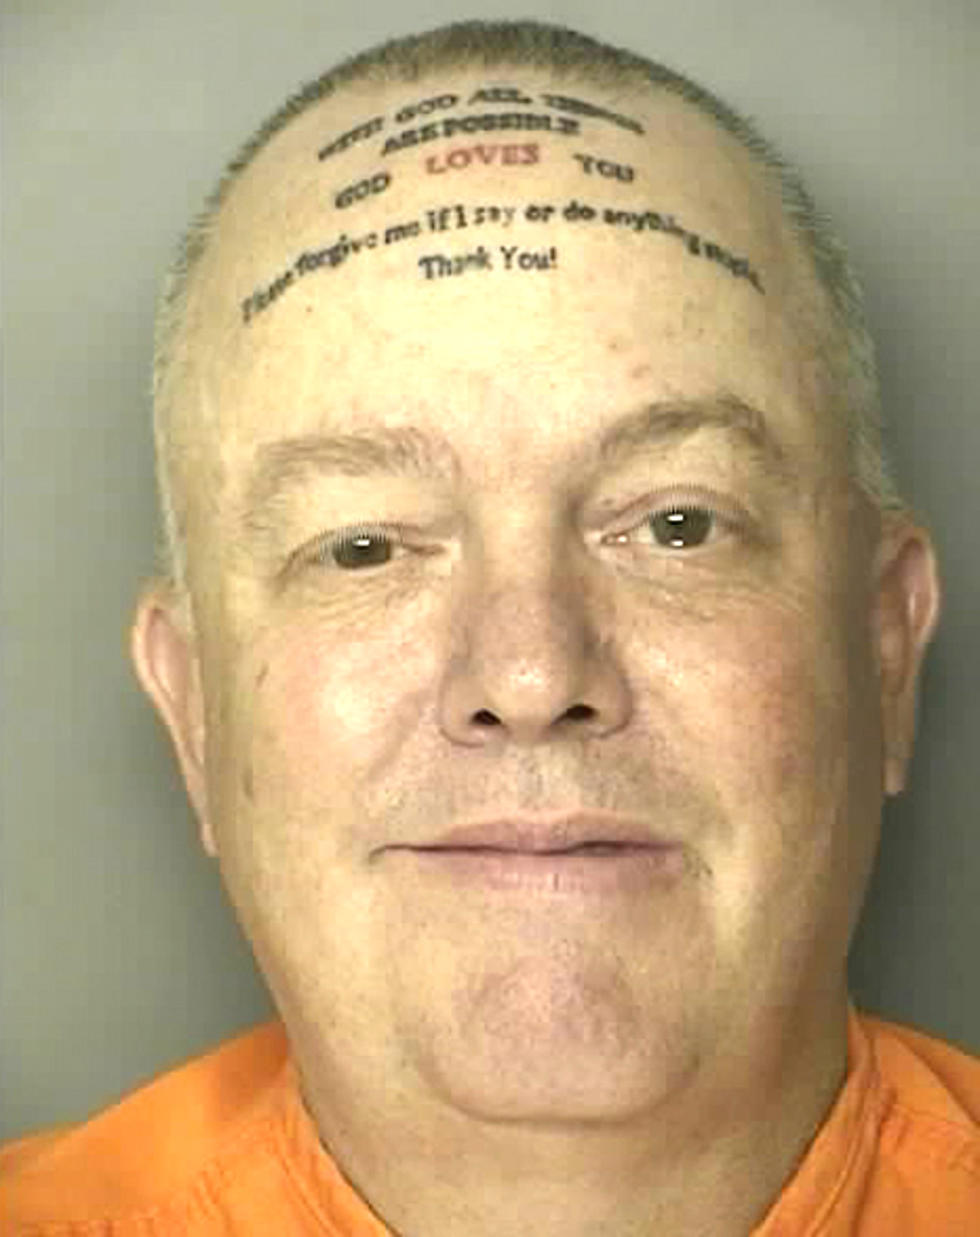 Man Asks Forgiveness With Tattoo On His Forehead